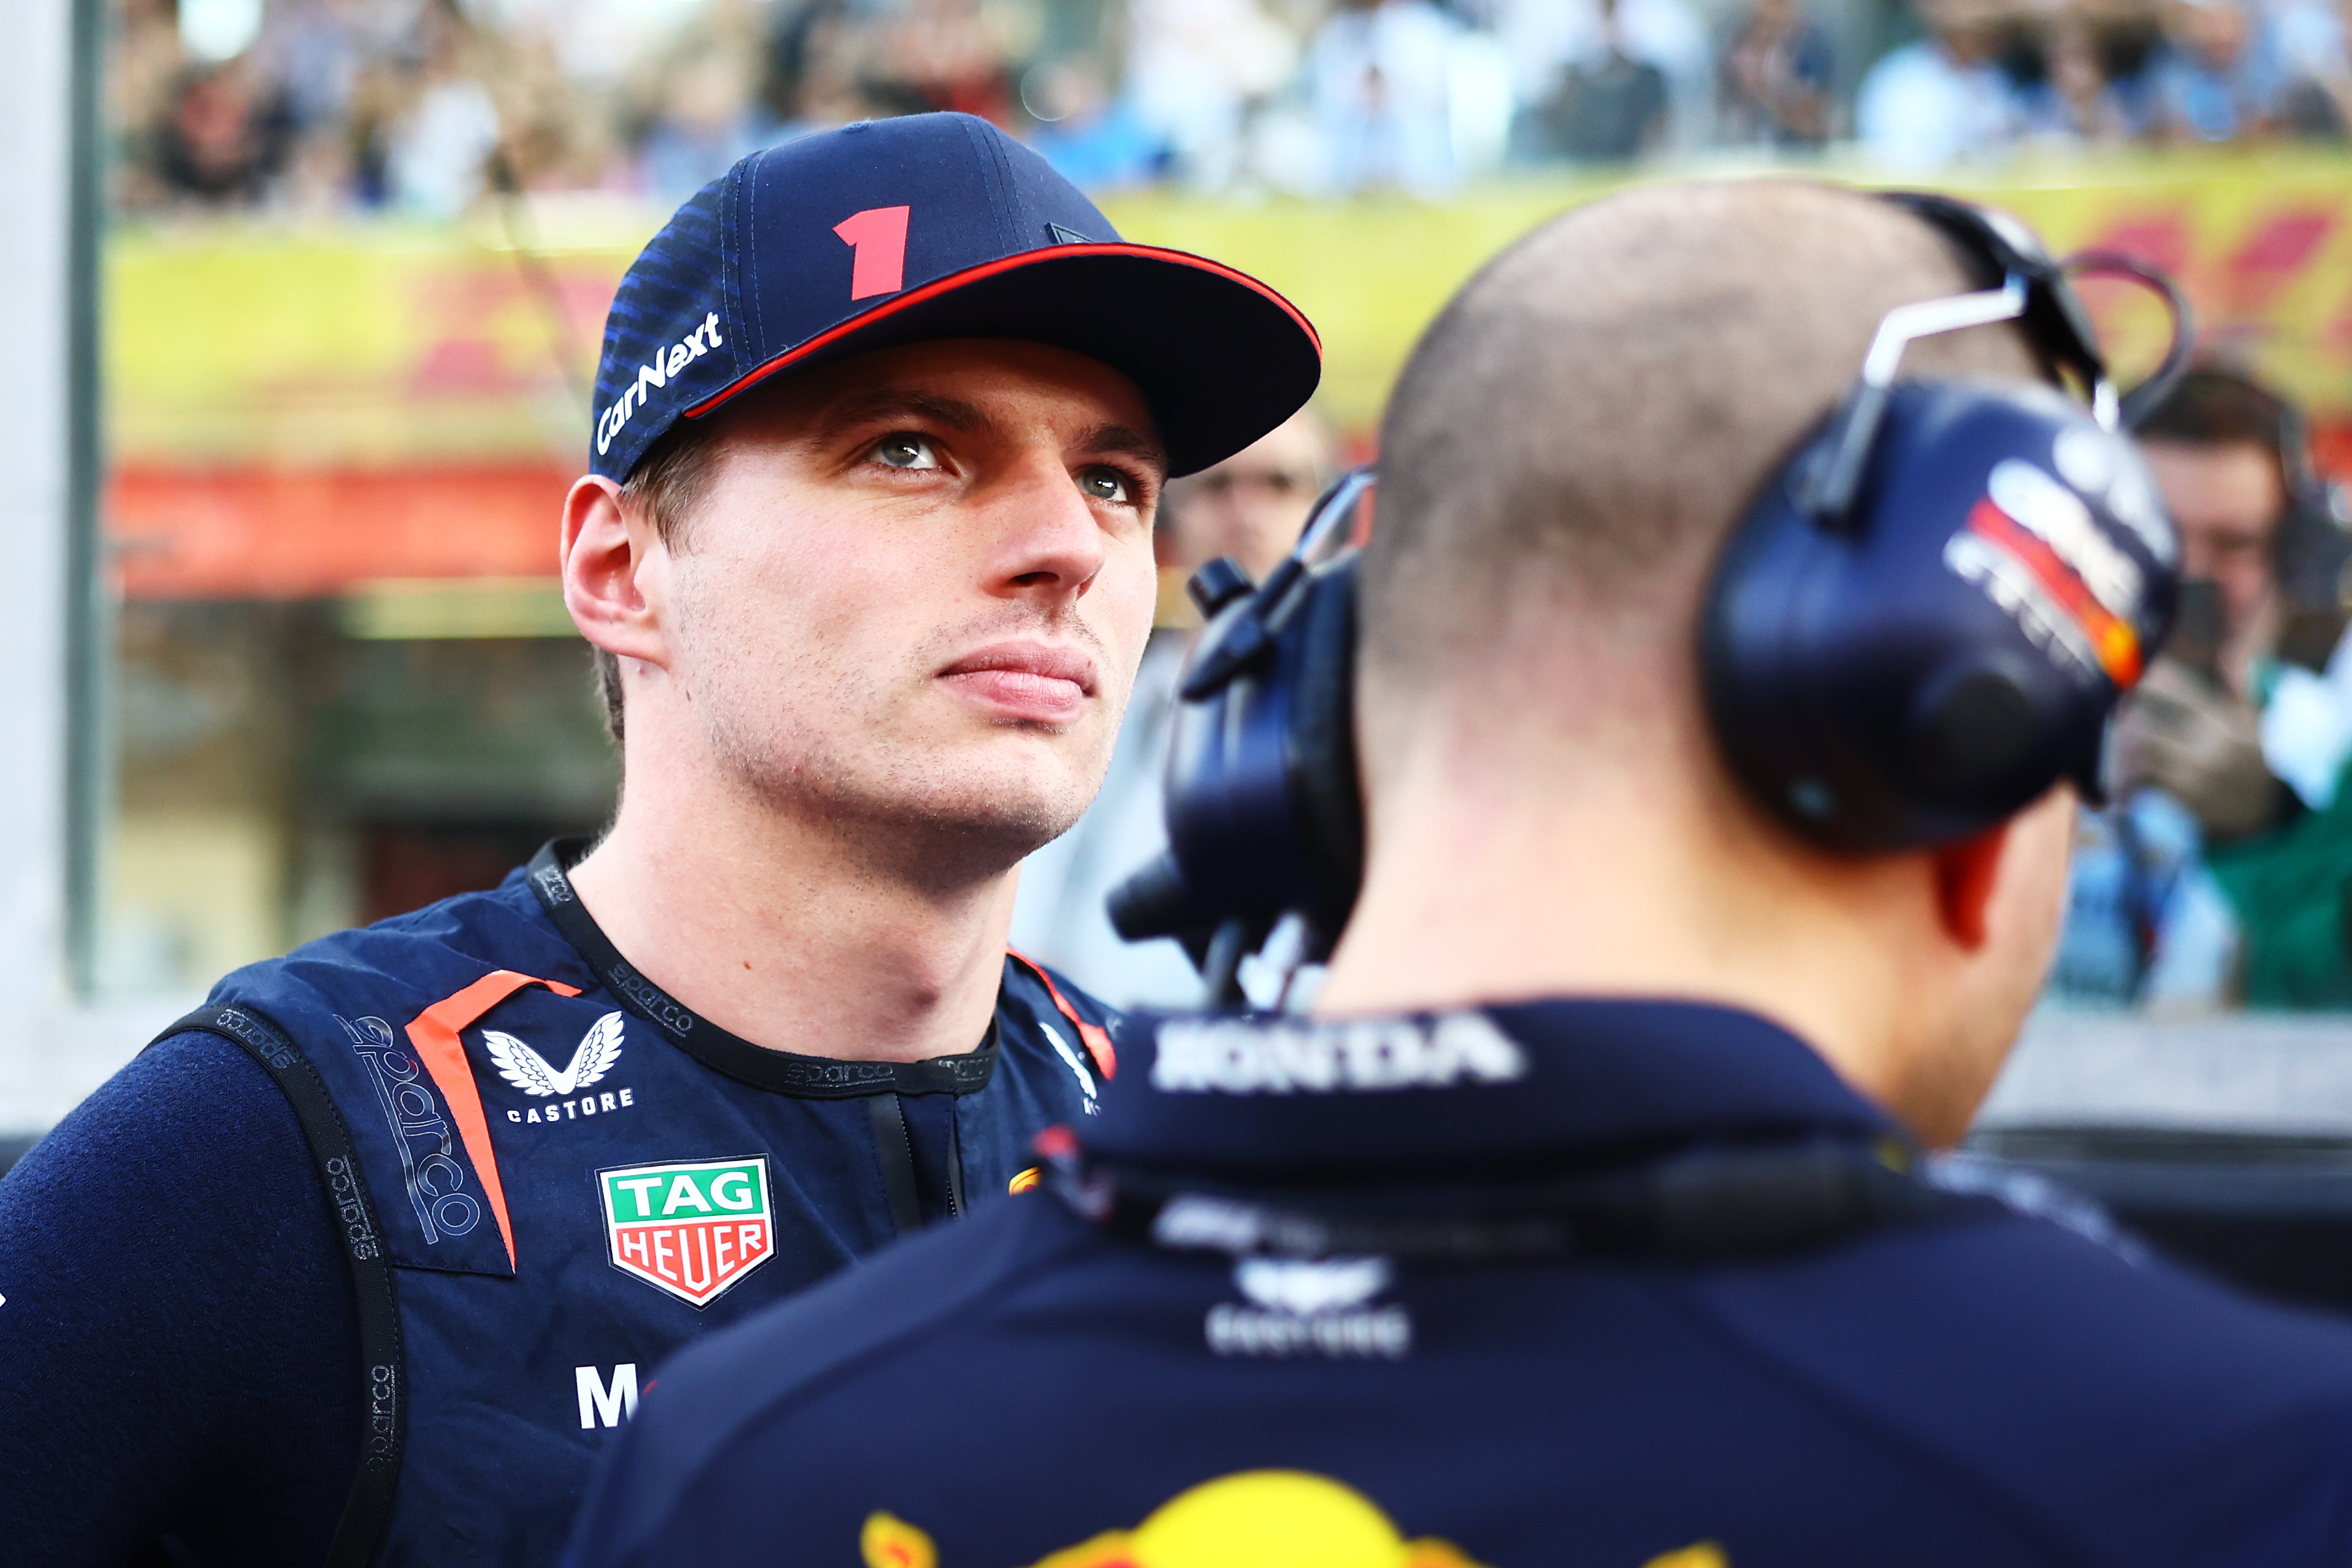 Fernando Alonso wants to team up with Max Verstappen to race at Le Mans